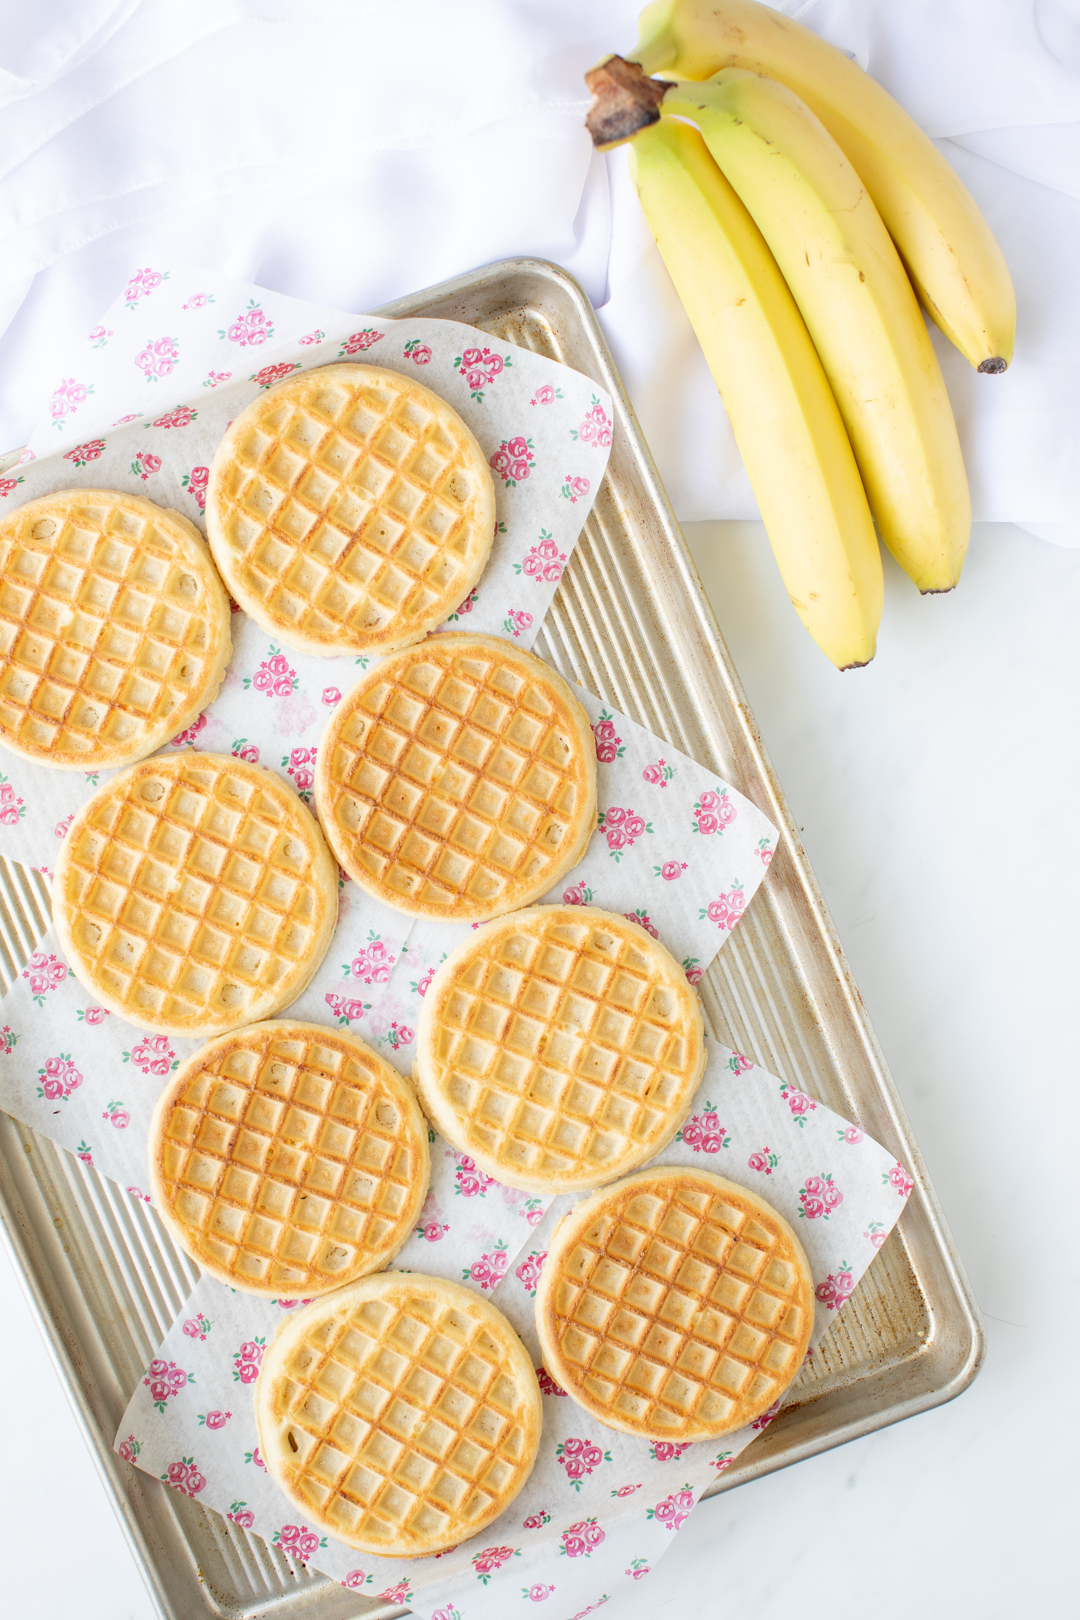 eggo waffles set on a baking sheet to prepare for serving